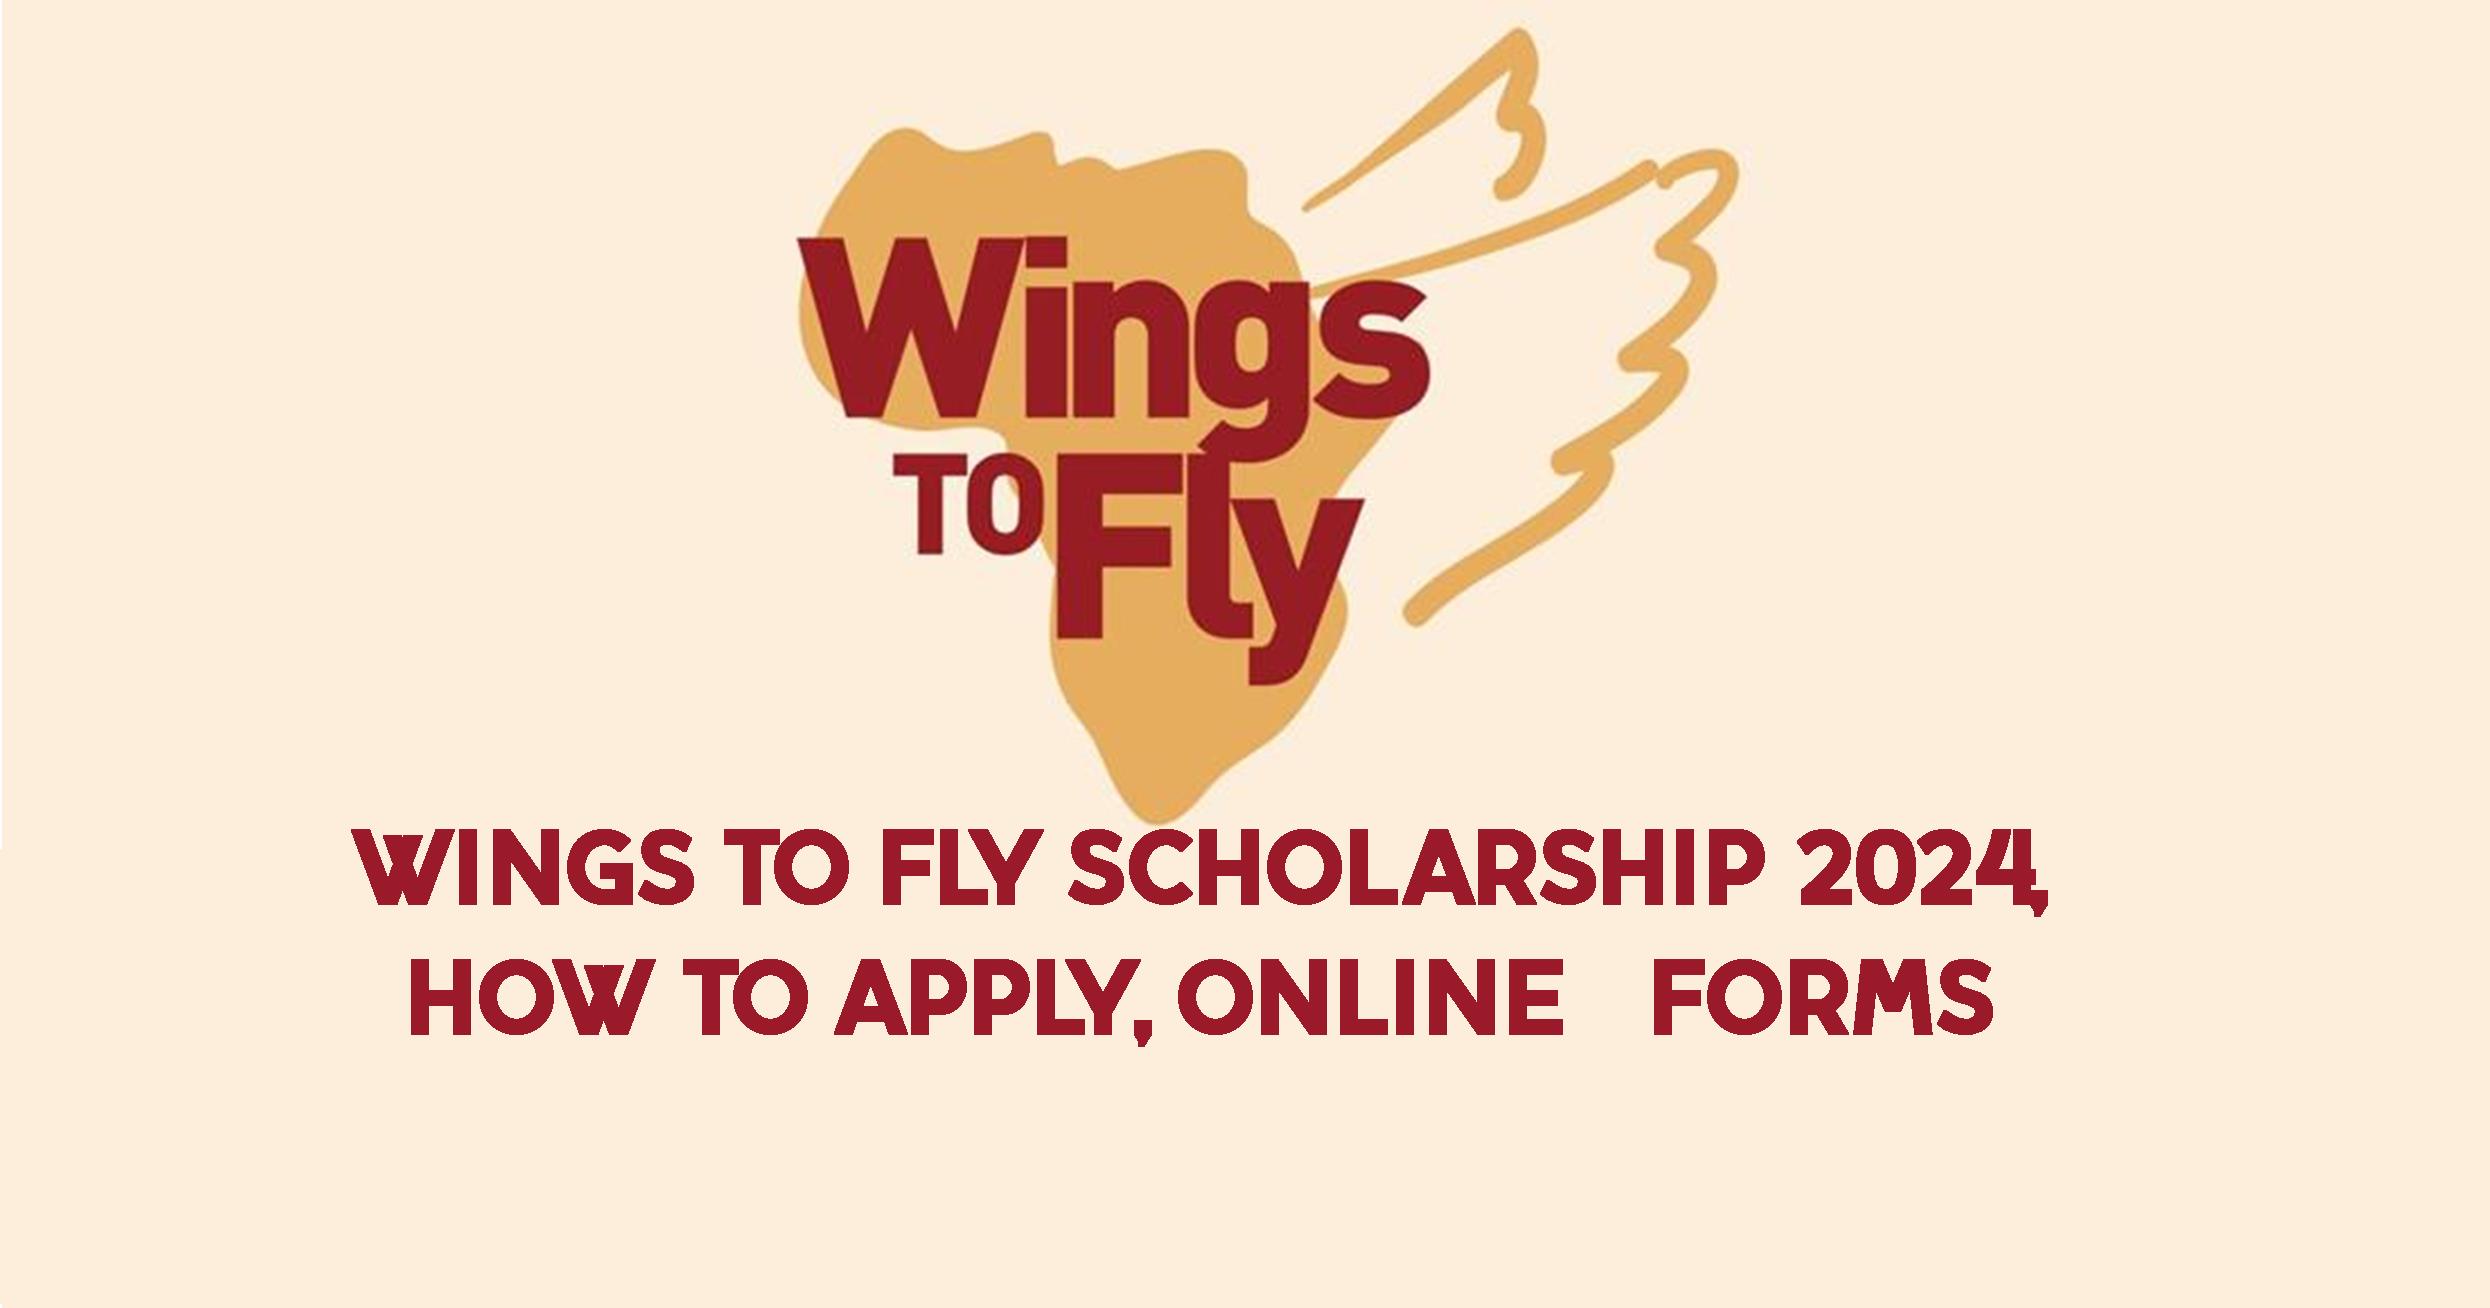 Wings to Fly Scholarship 2024 Application Forms Nangmak Media